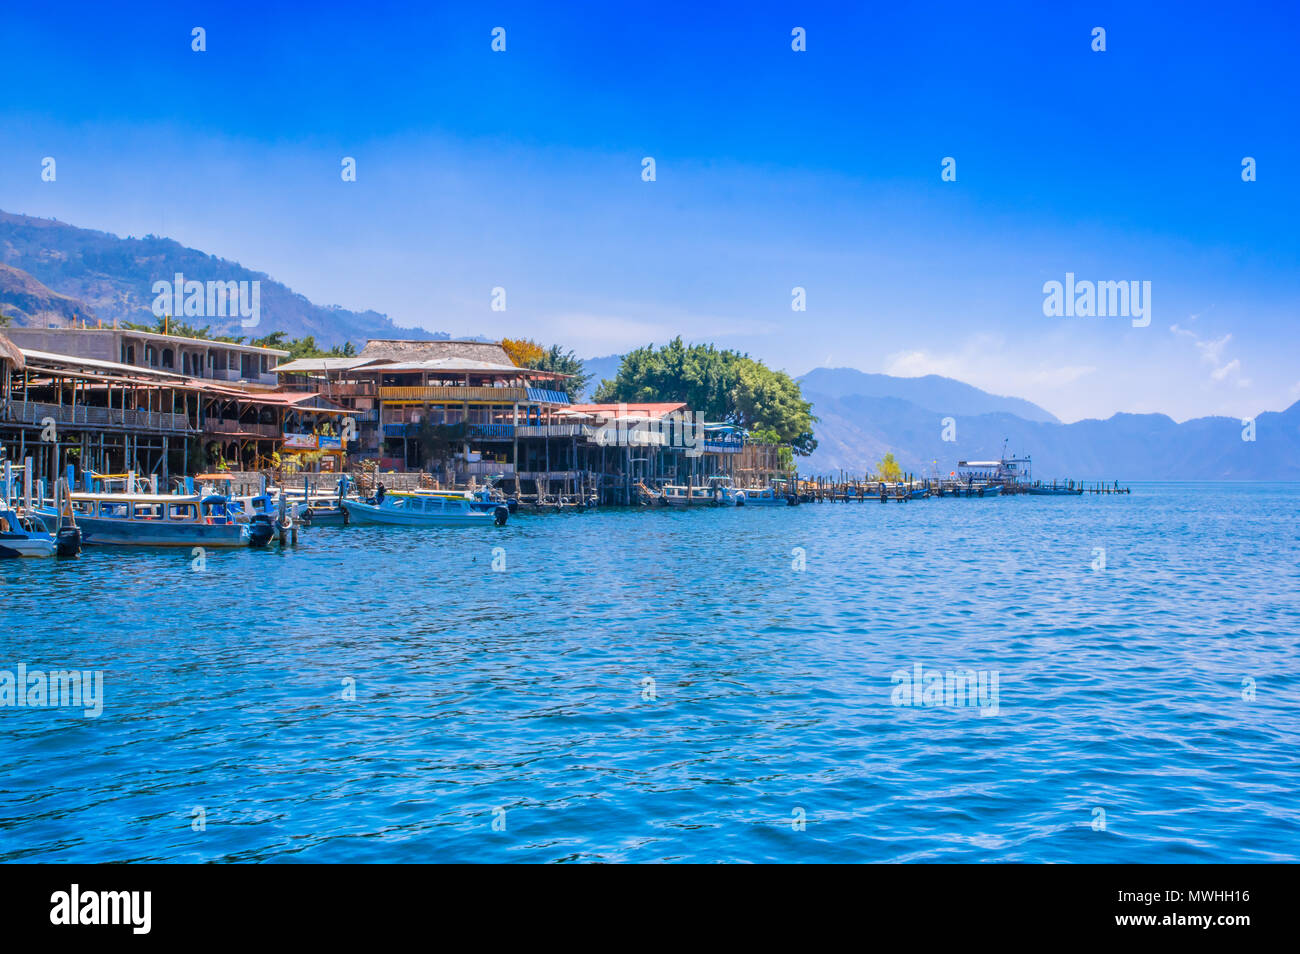 Panajachel, Guatemala -April, 25, 2018: Outdoor view of boats on the shore, small village in the background on the shore, Atitlan lake Stock Photo